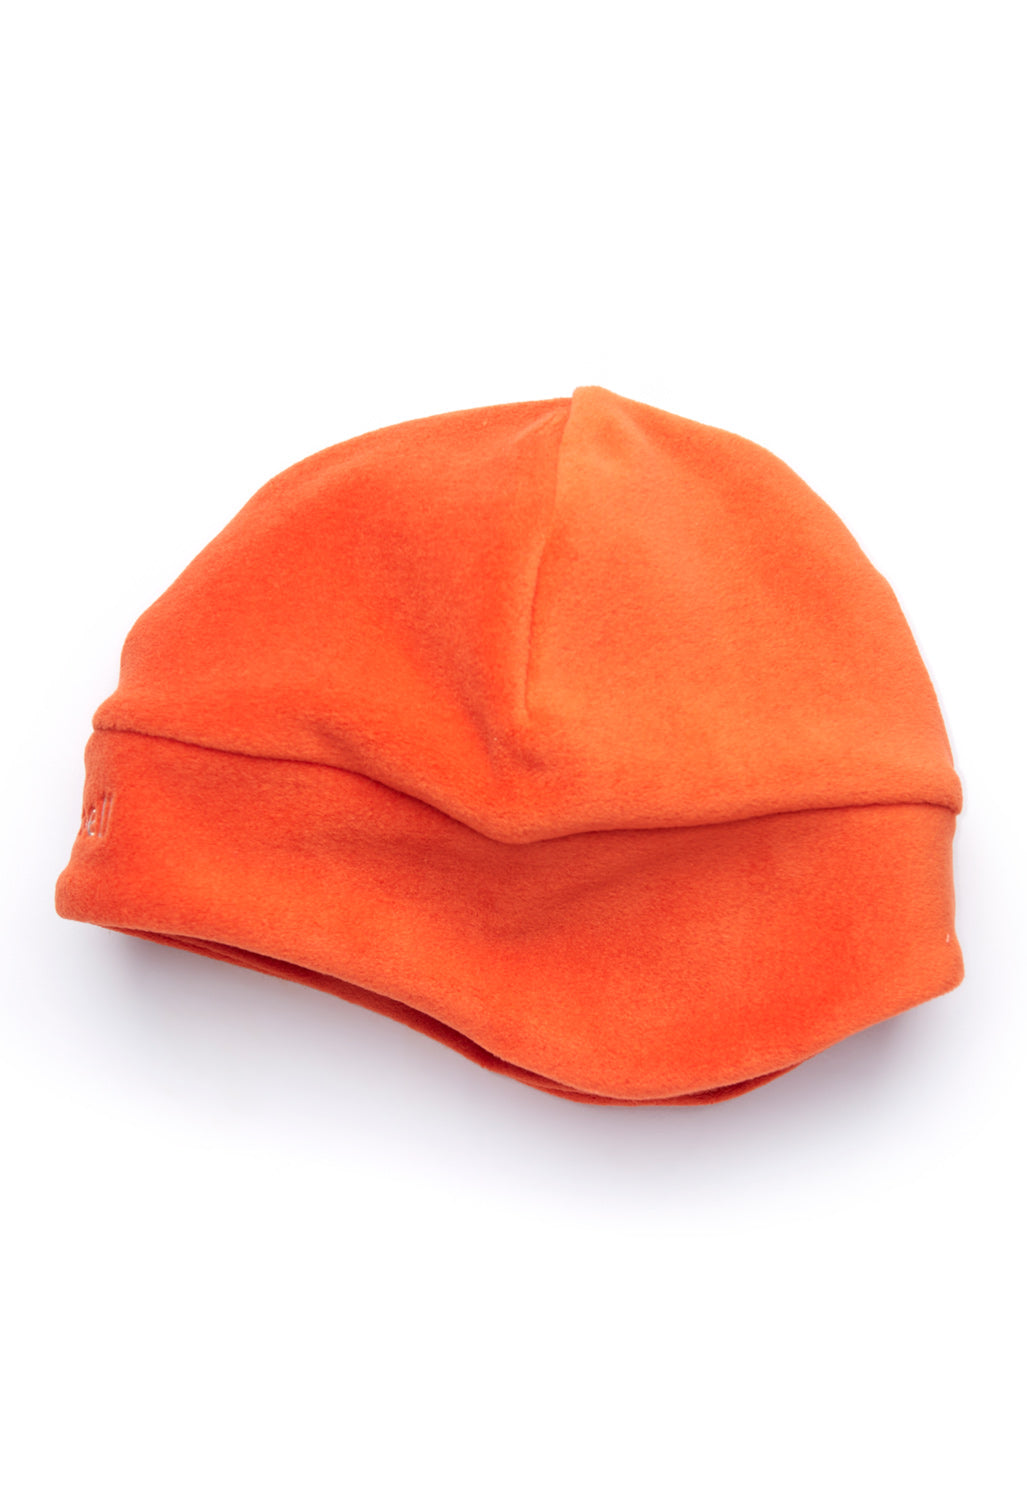 Montbell Chameece Cap With Ear Warmer - Orange